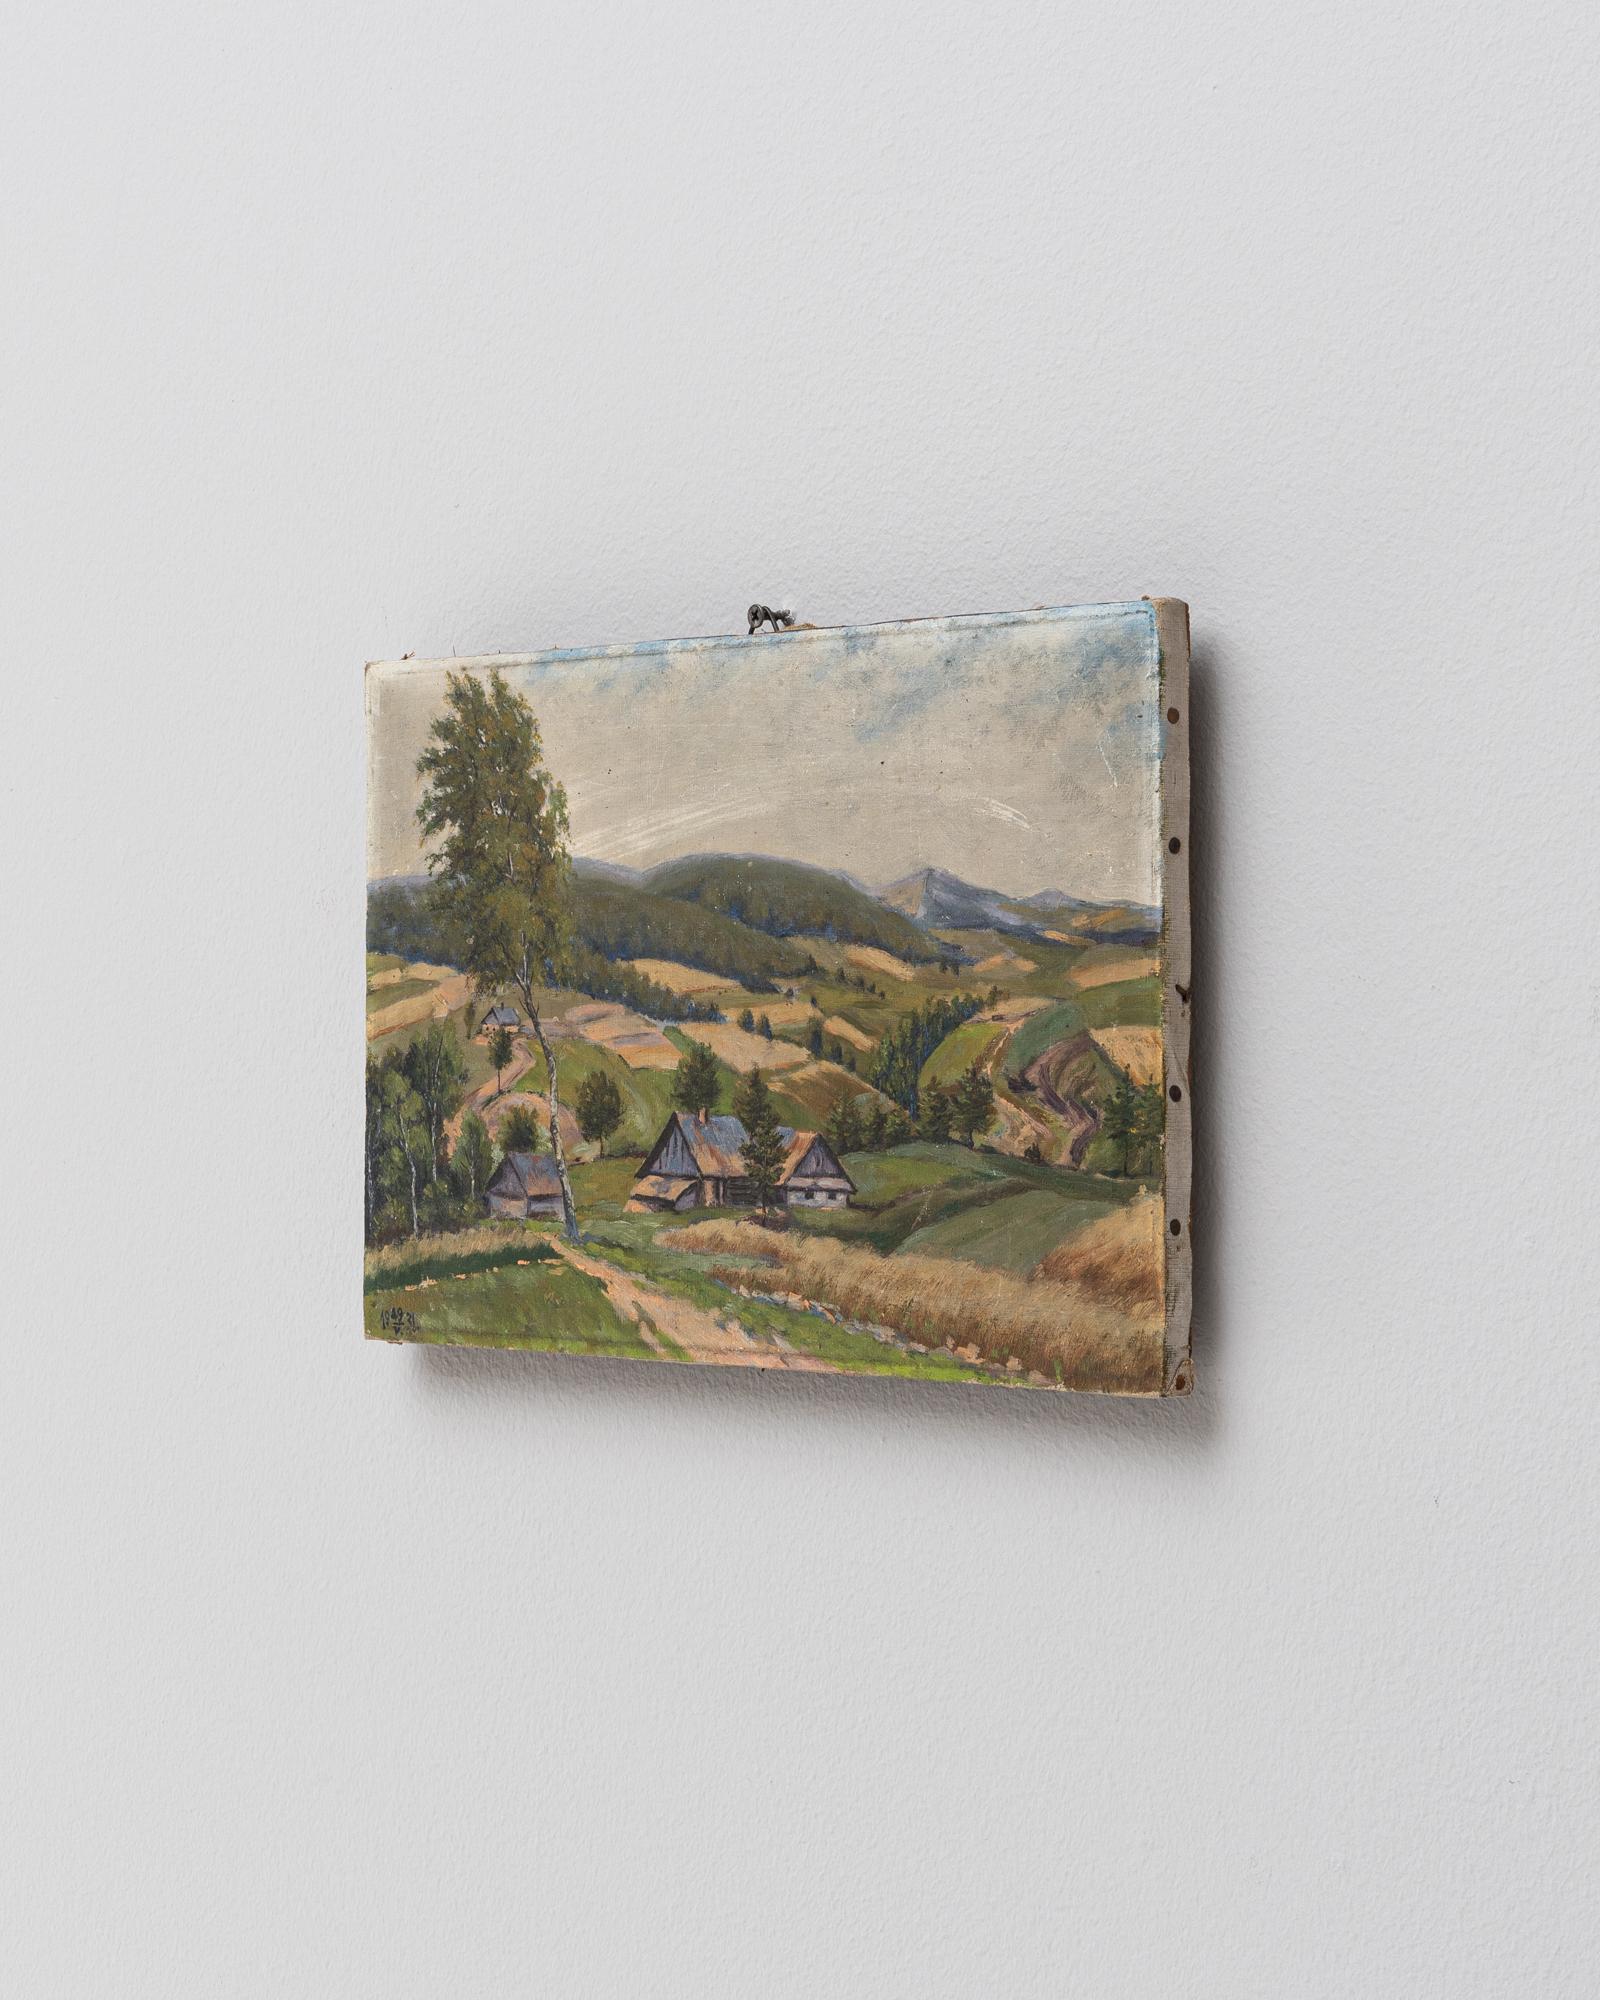 This 20th Century Belgian Painting is a pastoral depiction of rural tranquility and agricultural grace. The artist has captured a sprawling landscape filled with undulating hills, fields ready for harvest, and quaint farmhouses dotted across the